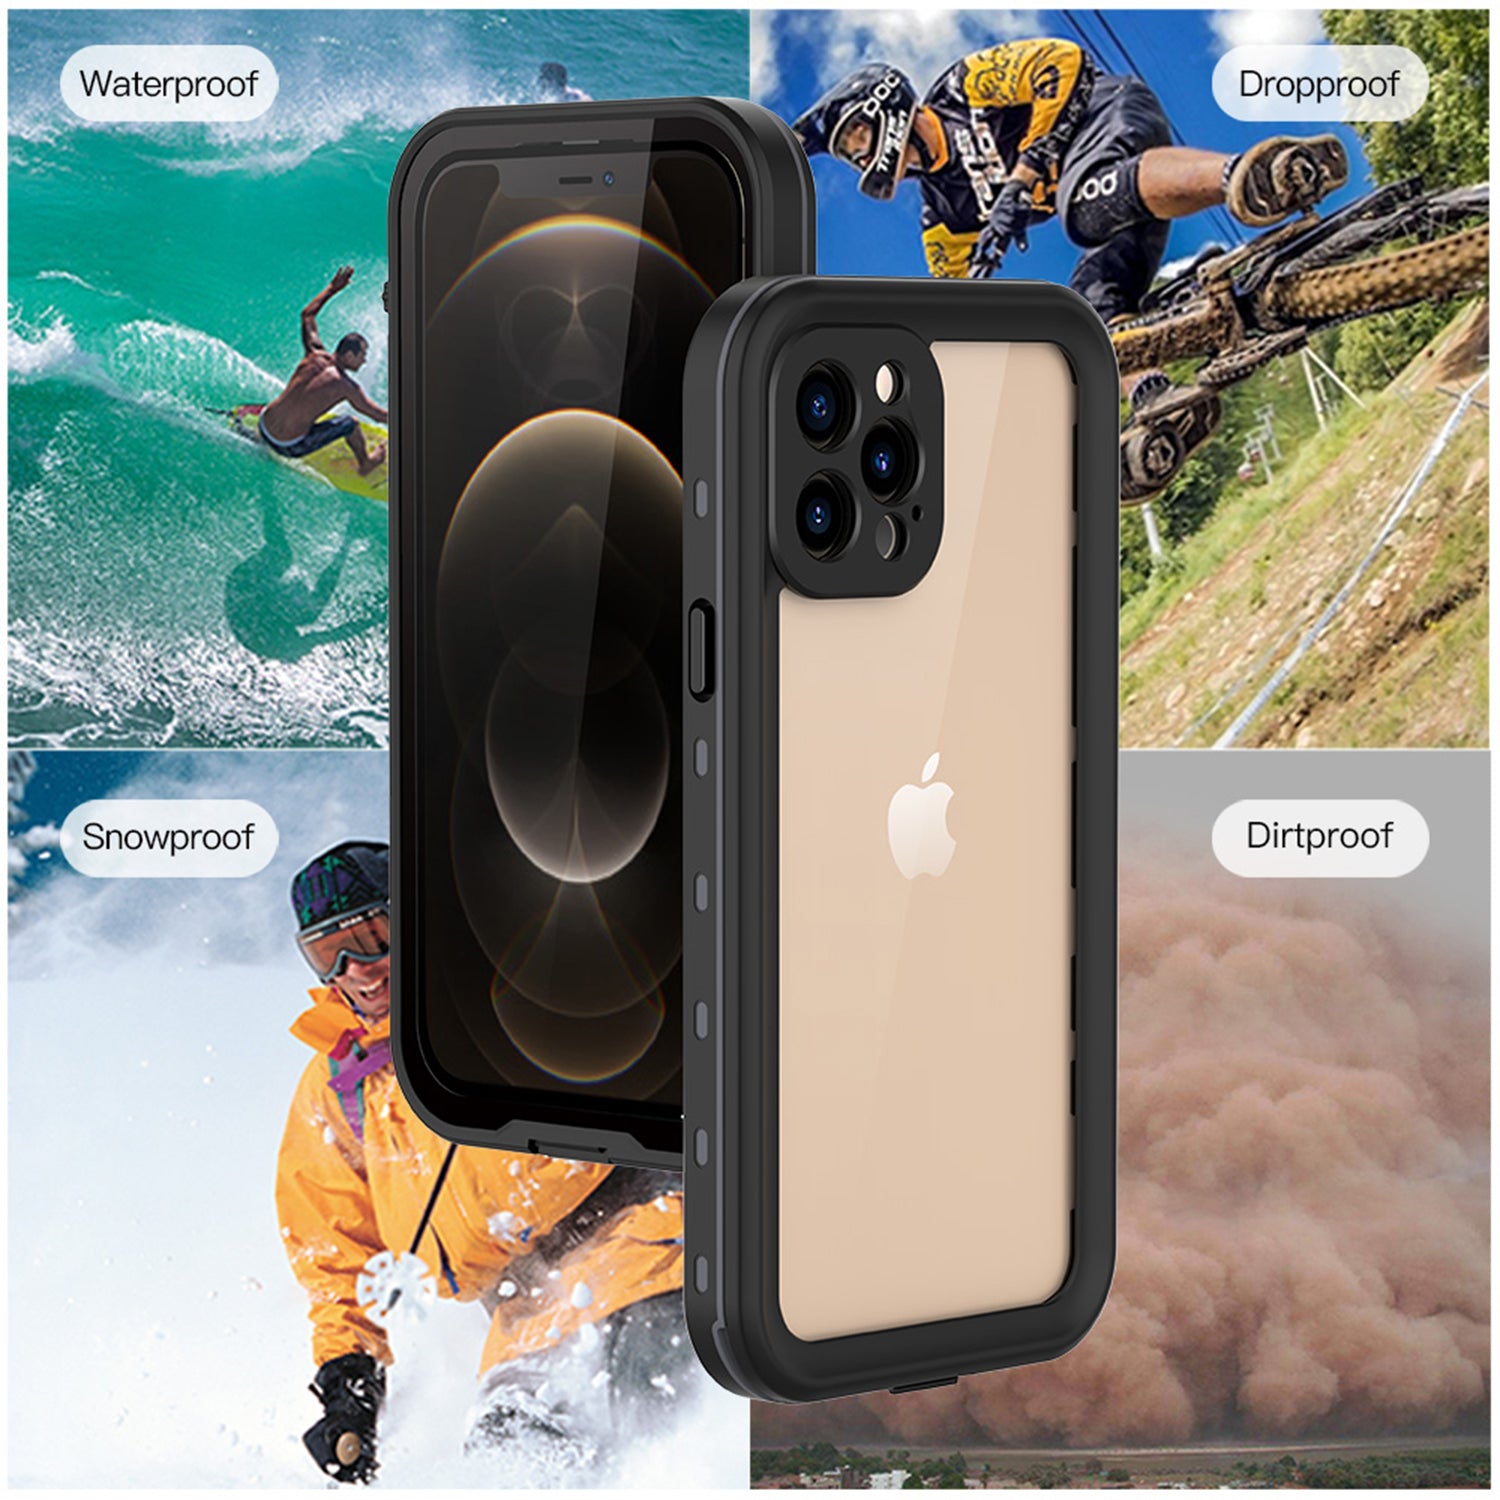 Apple iPhone 12 Pro Max (6.7") 360 Full Protective Waterproof Case with Built-in Screen Fingerprint Protector